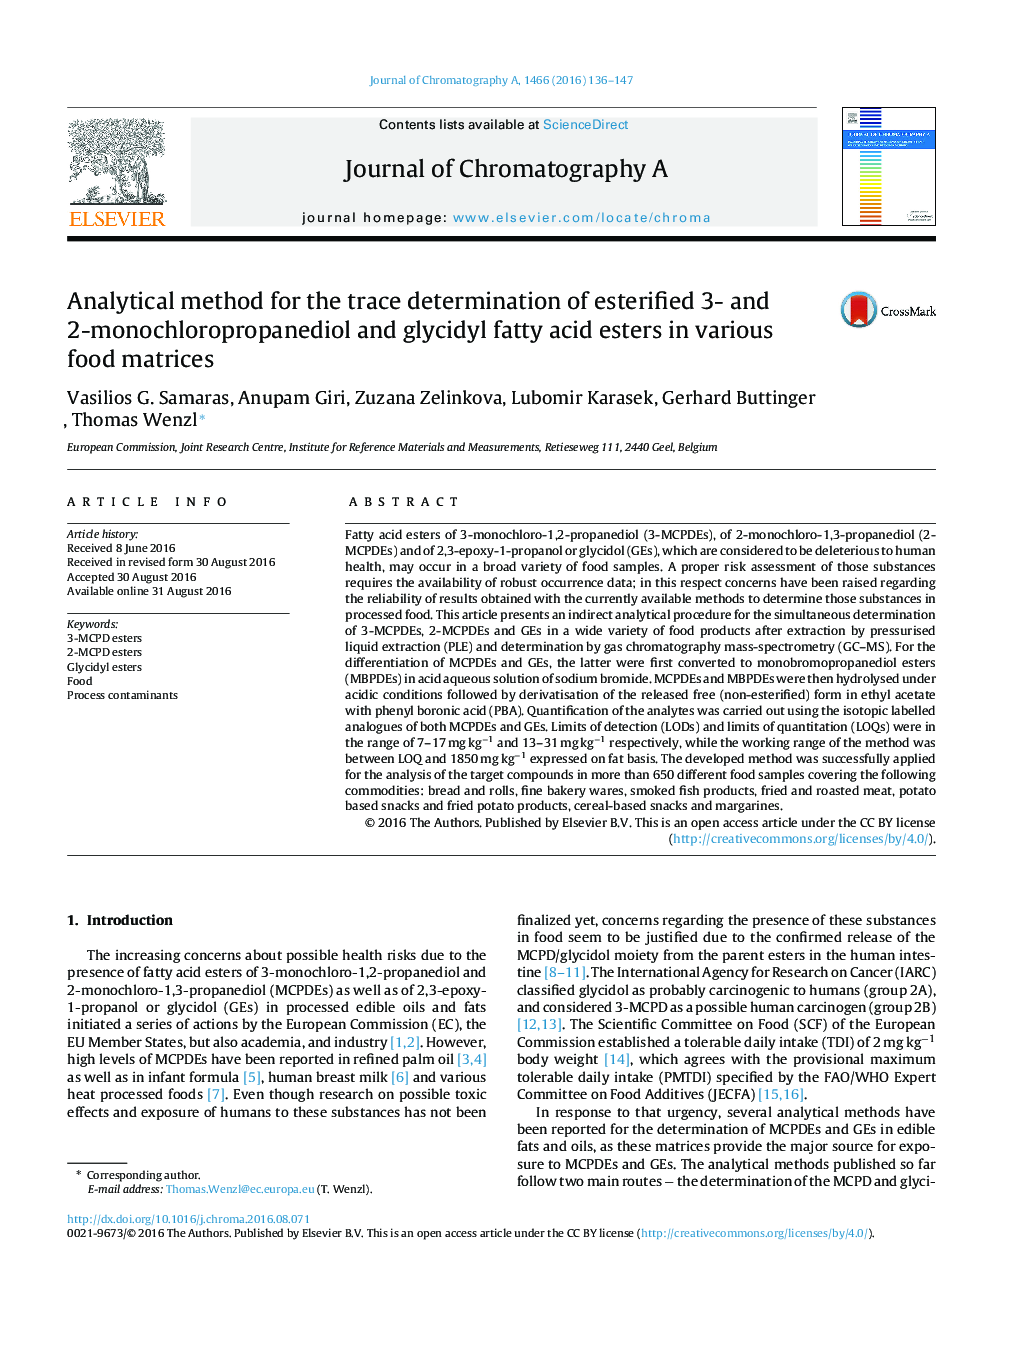 Analytical method for the trace determination of esterified 3- and 2-monochloropropanediol and glycidyl fatty acid esters in various food matrices